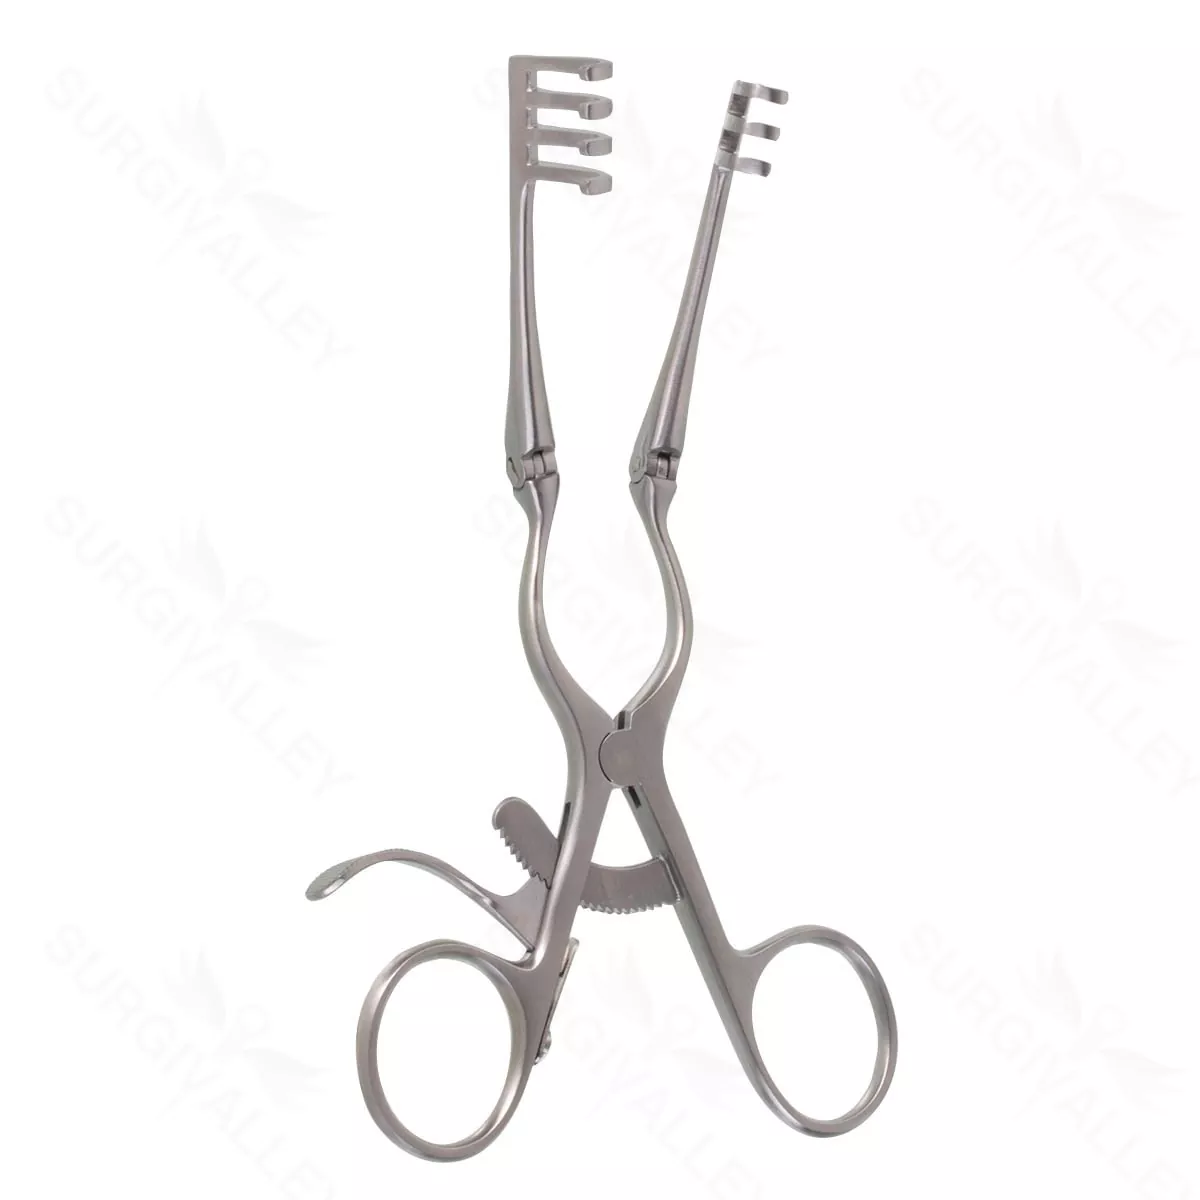 6 1/2″ Weitlaner Retractor – w/hinged arms 3×4 blunt prongs